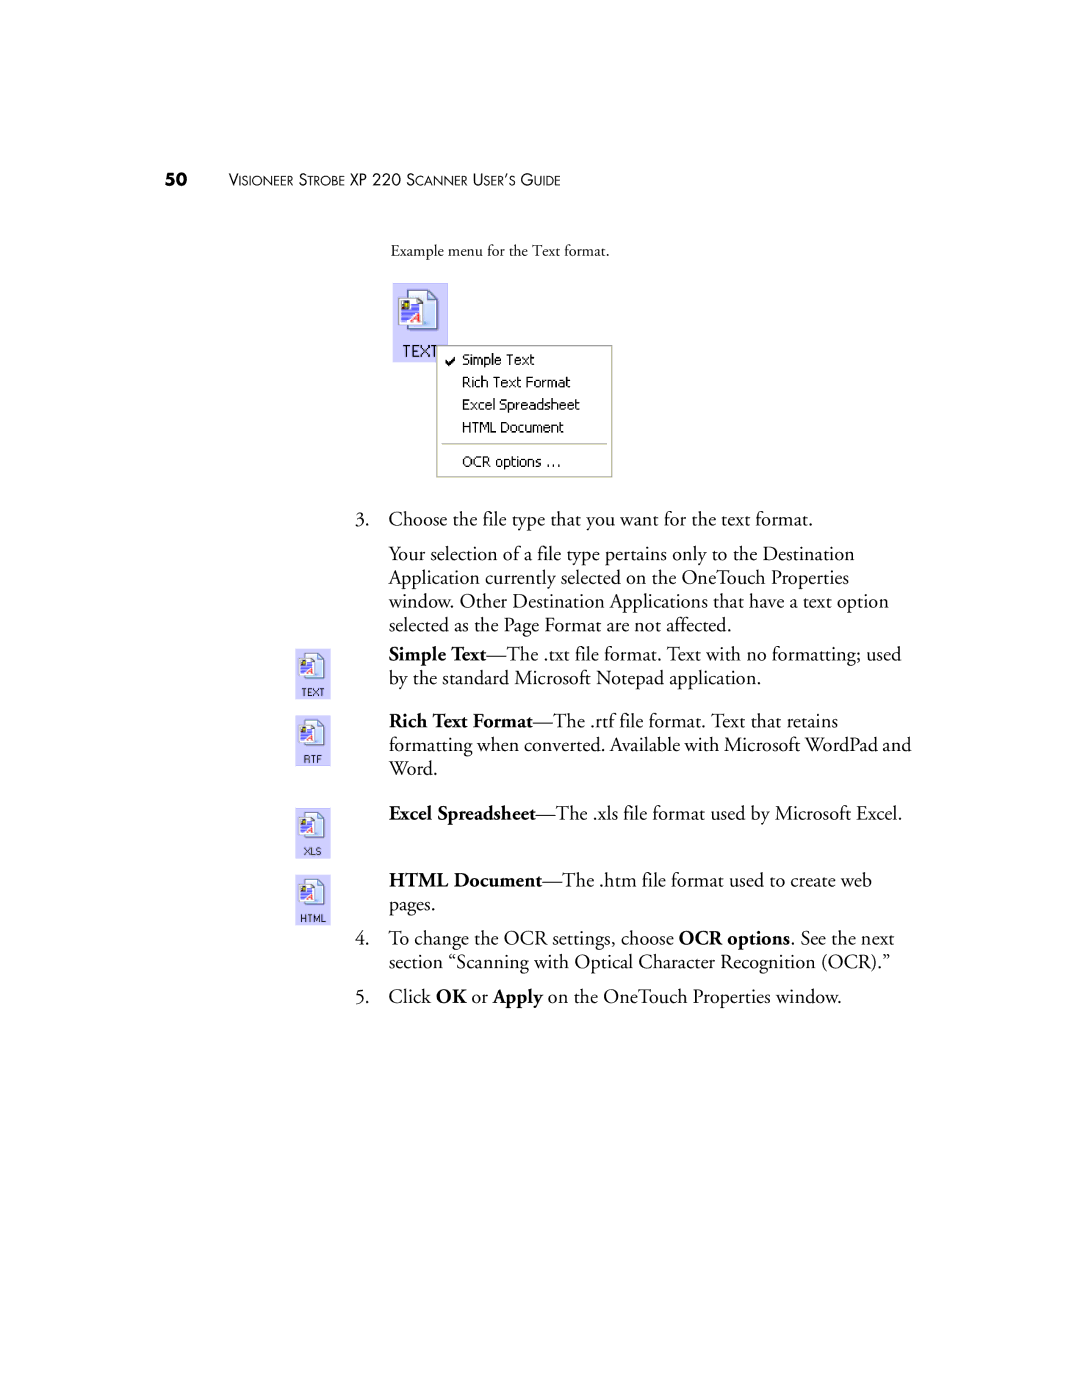 Visioneer 220 manual Example menu for the Text format 